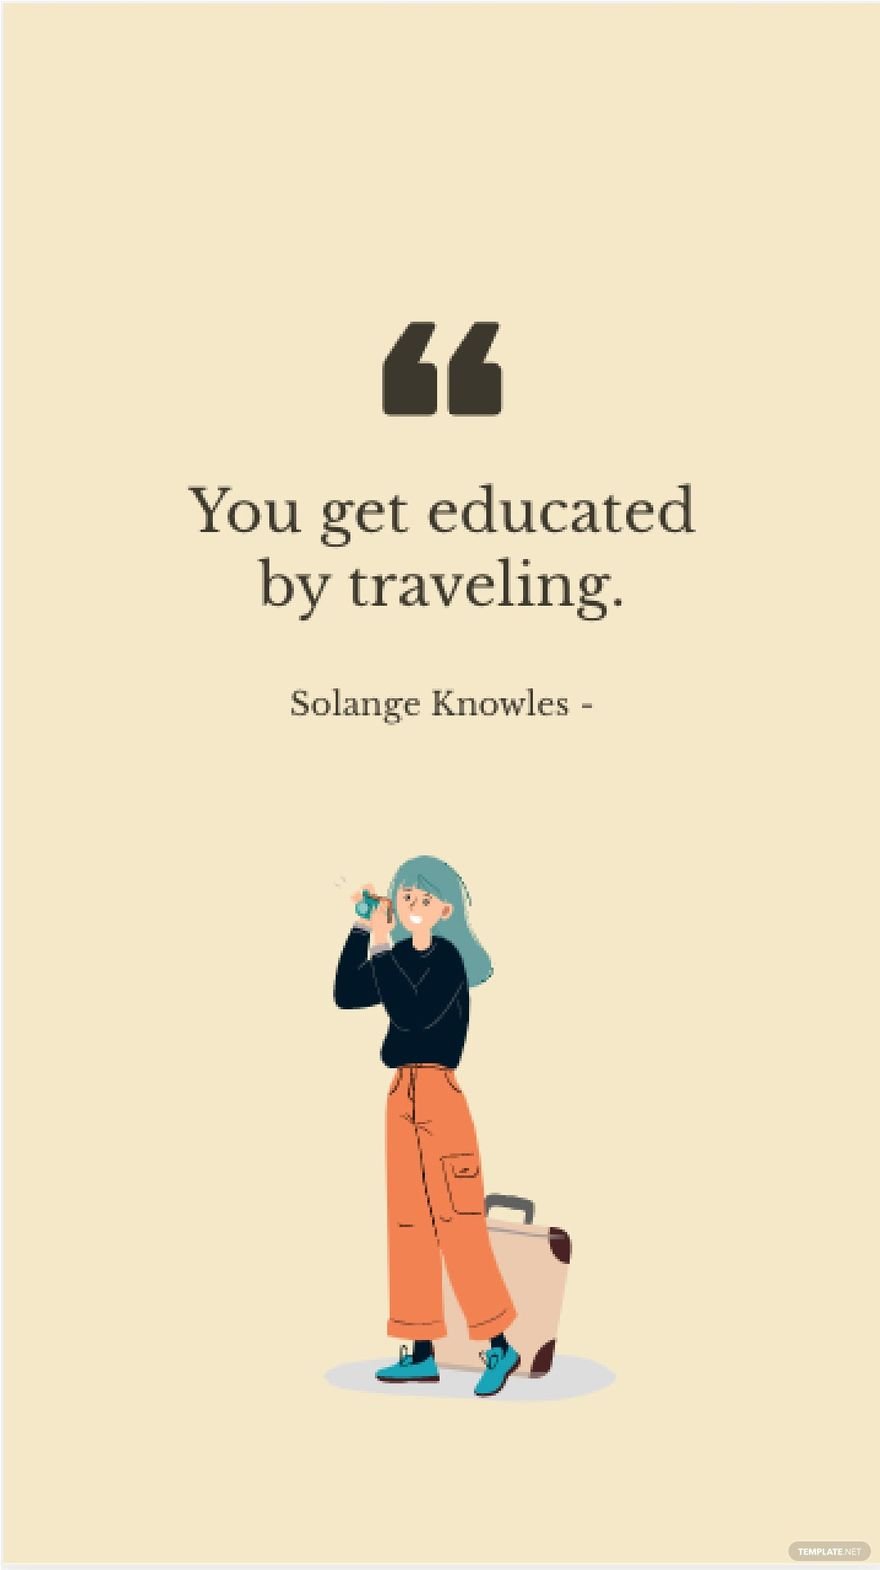 Solange Knowles - You get educated by traveling.